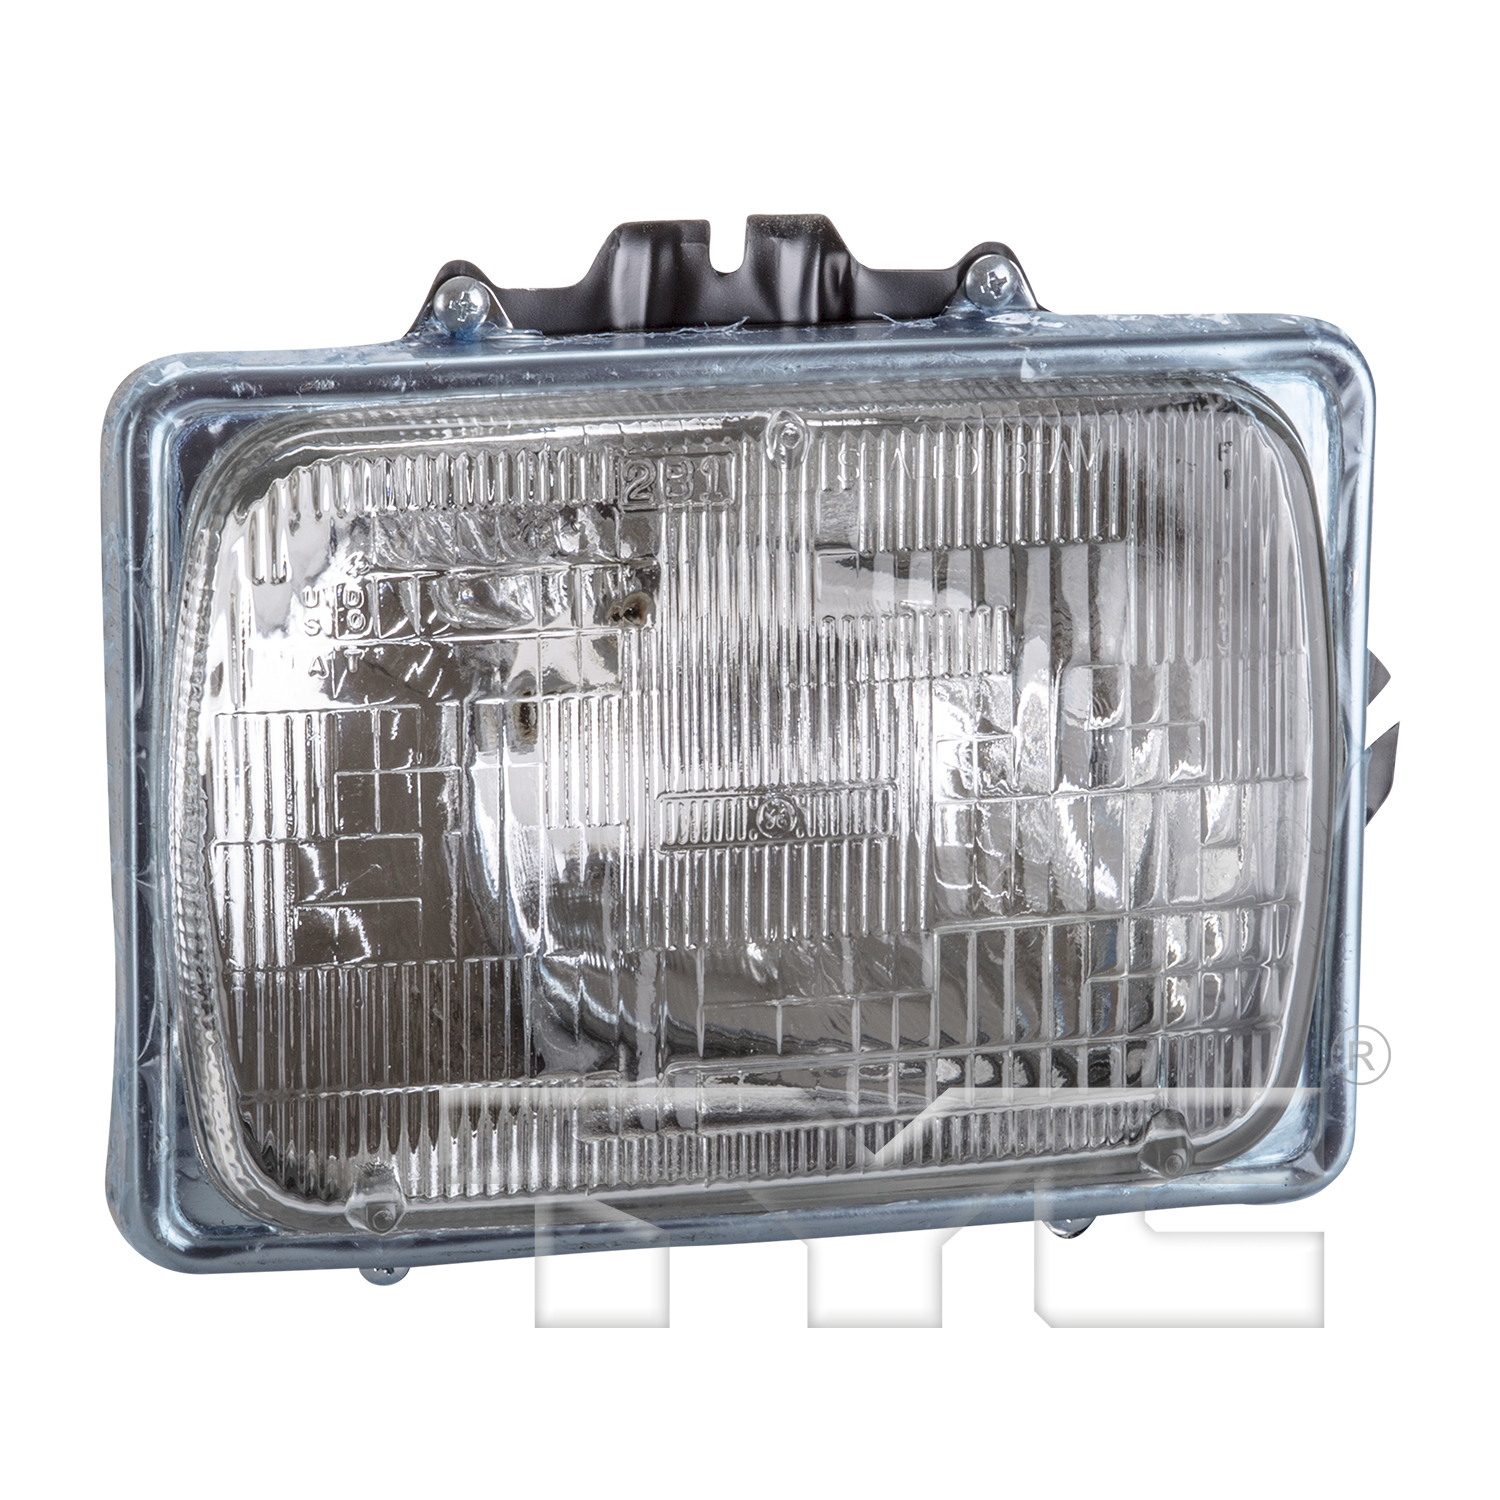 Aftermarket HEADLIGHTS for FORD - E-150 ECONOLINE CLUB WAGON, E-150 ECONOLINE CLUB WAGON,92-02,RT Headlamp assy sealed beam